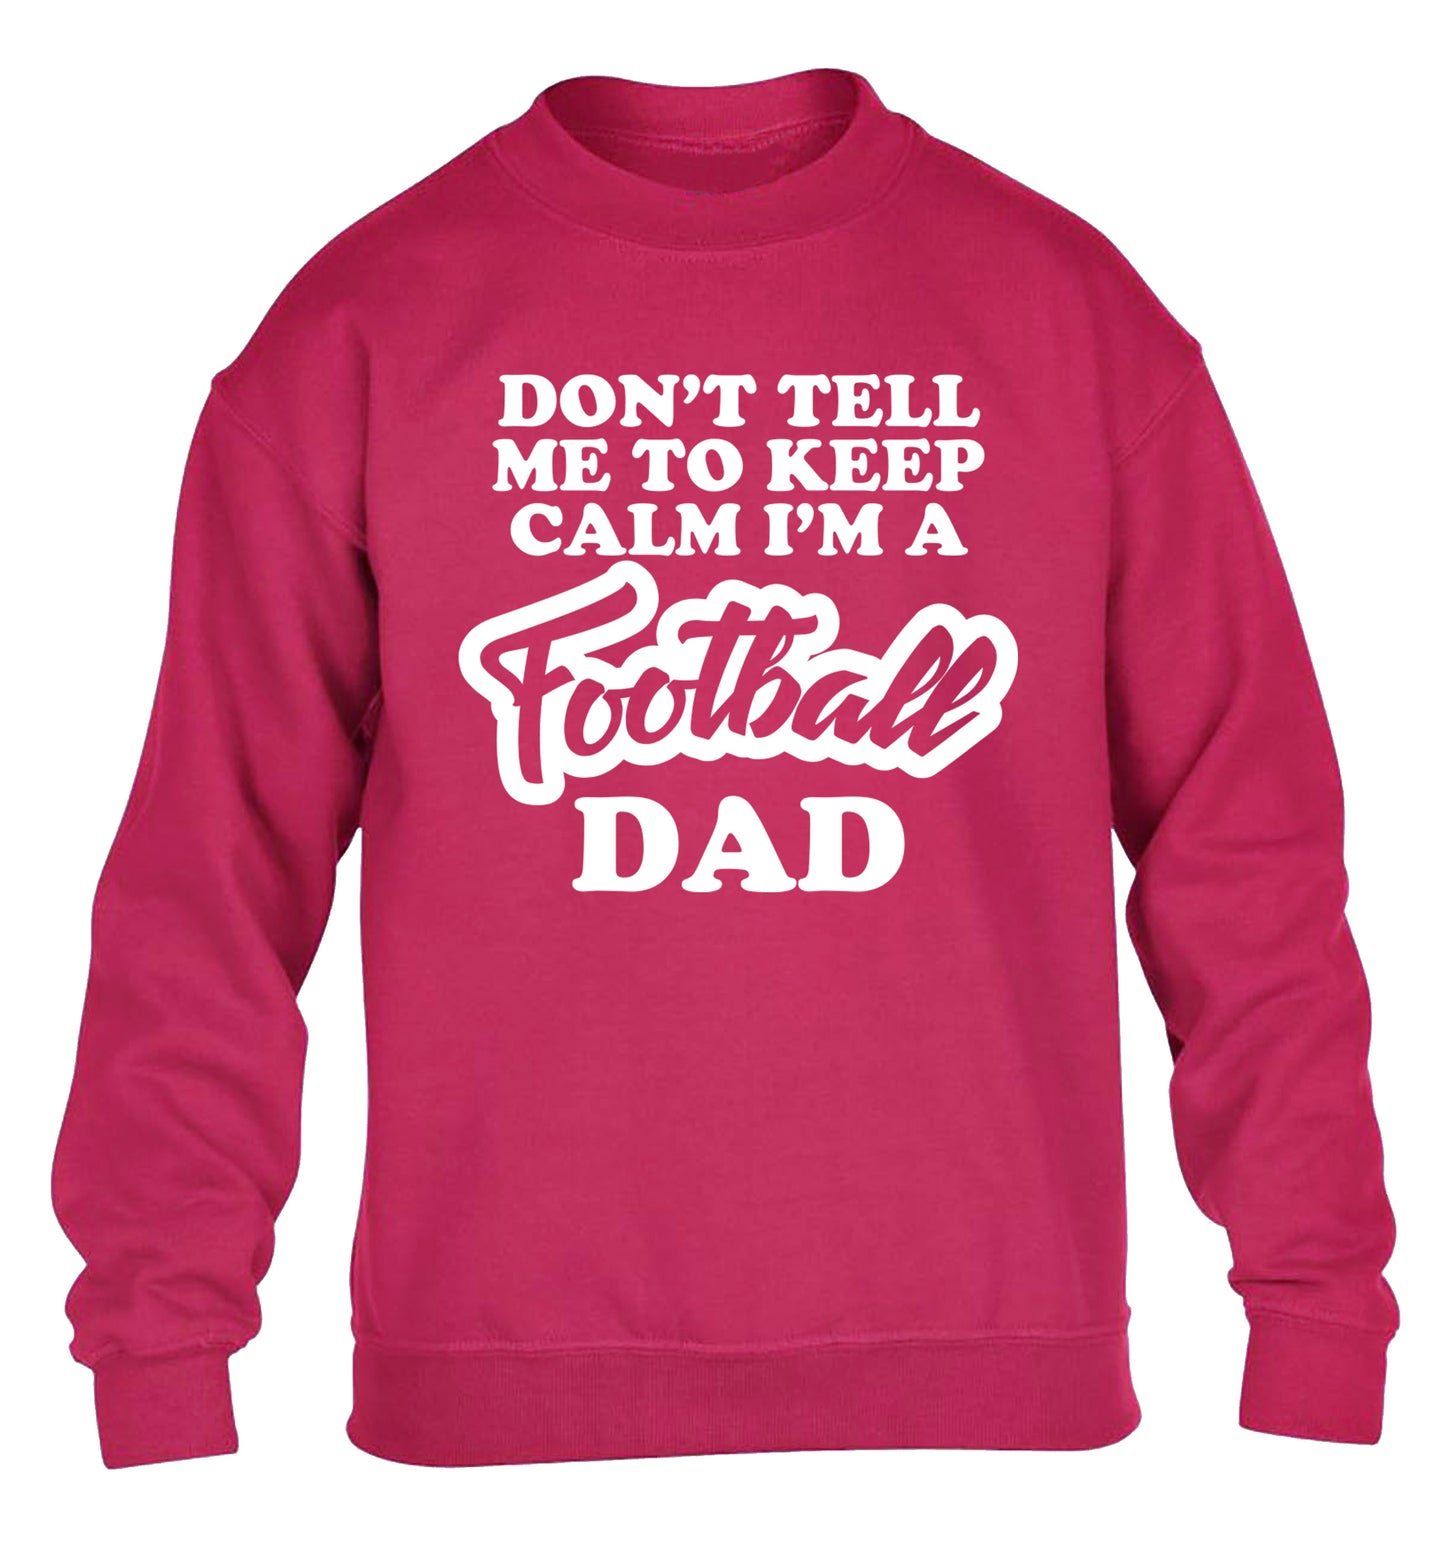 Don't tell me to keep calm I'm a football dad children's pink sweater 12-14 Years